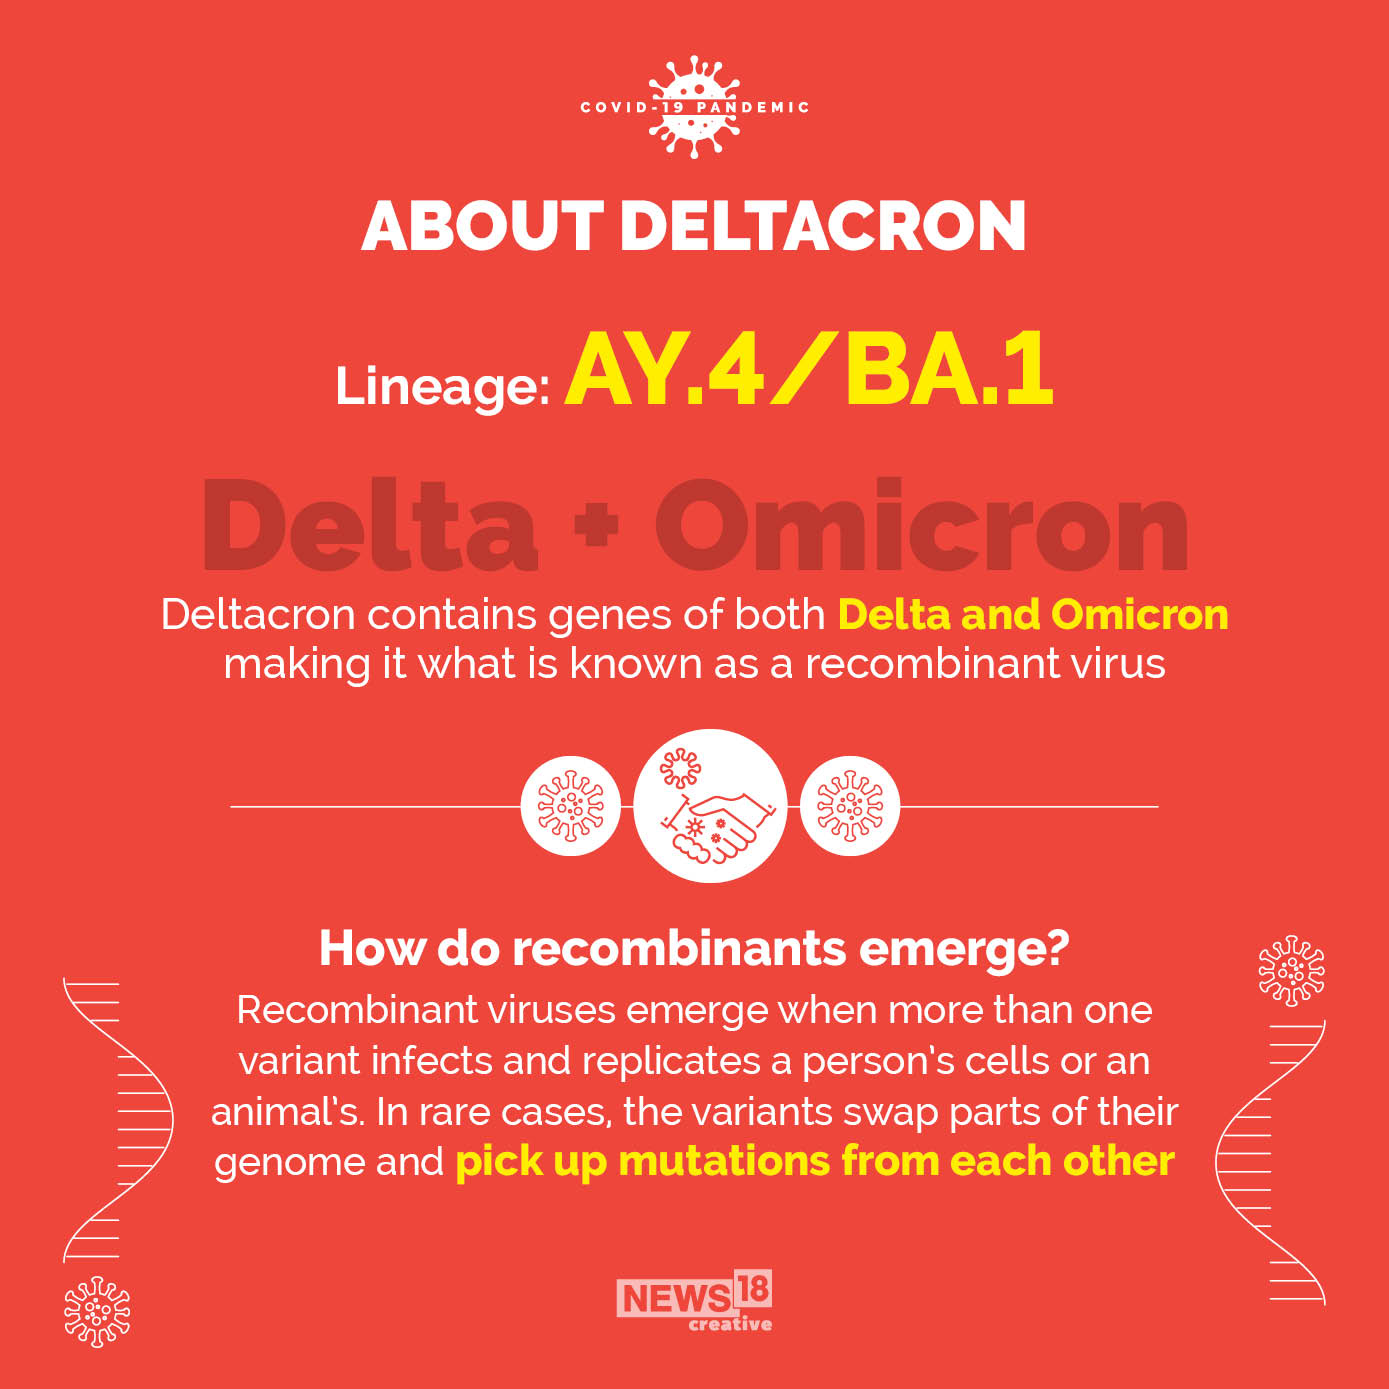 Deltacron is here. Here's what you should know